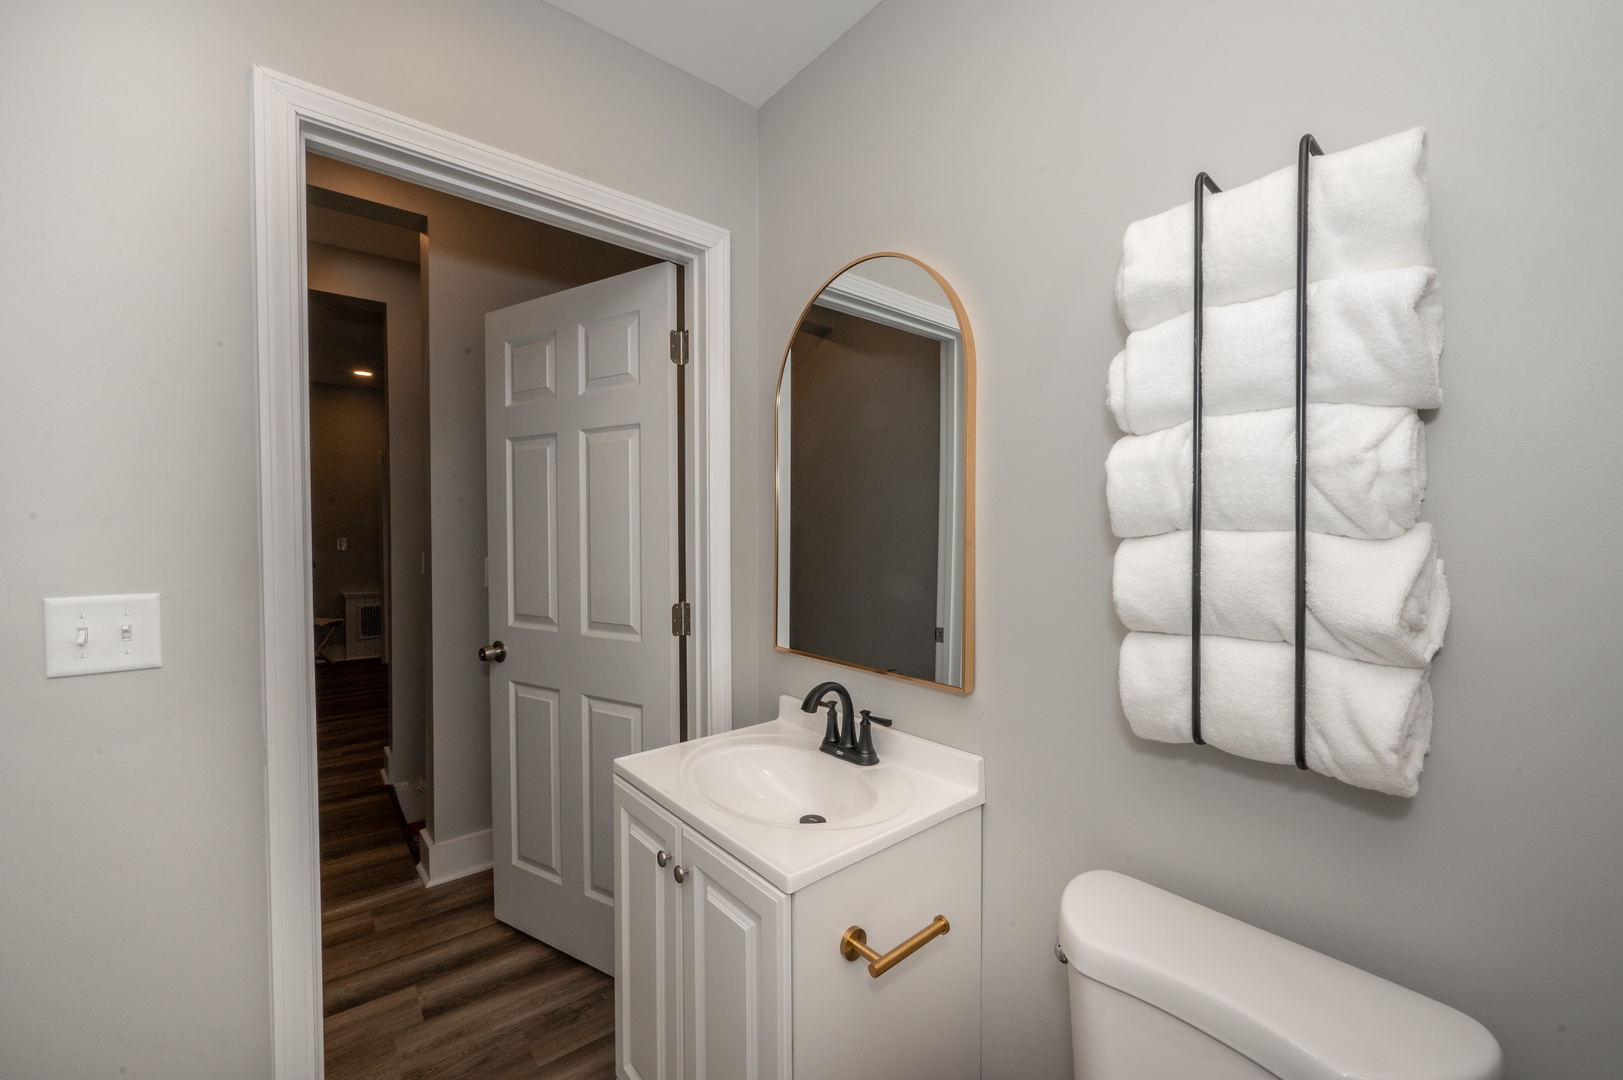 Apt 2 – The full bathroom offers guests a single vanity & walk-in shower